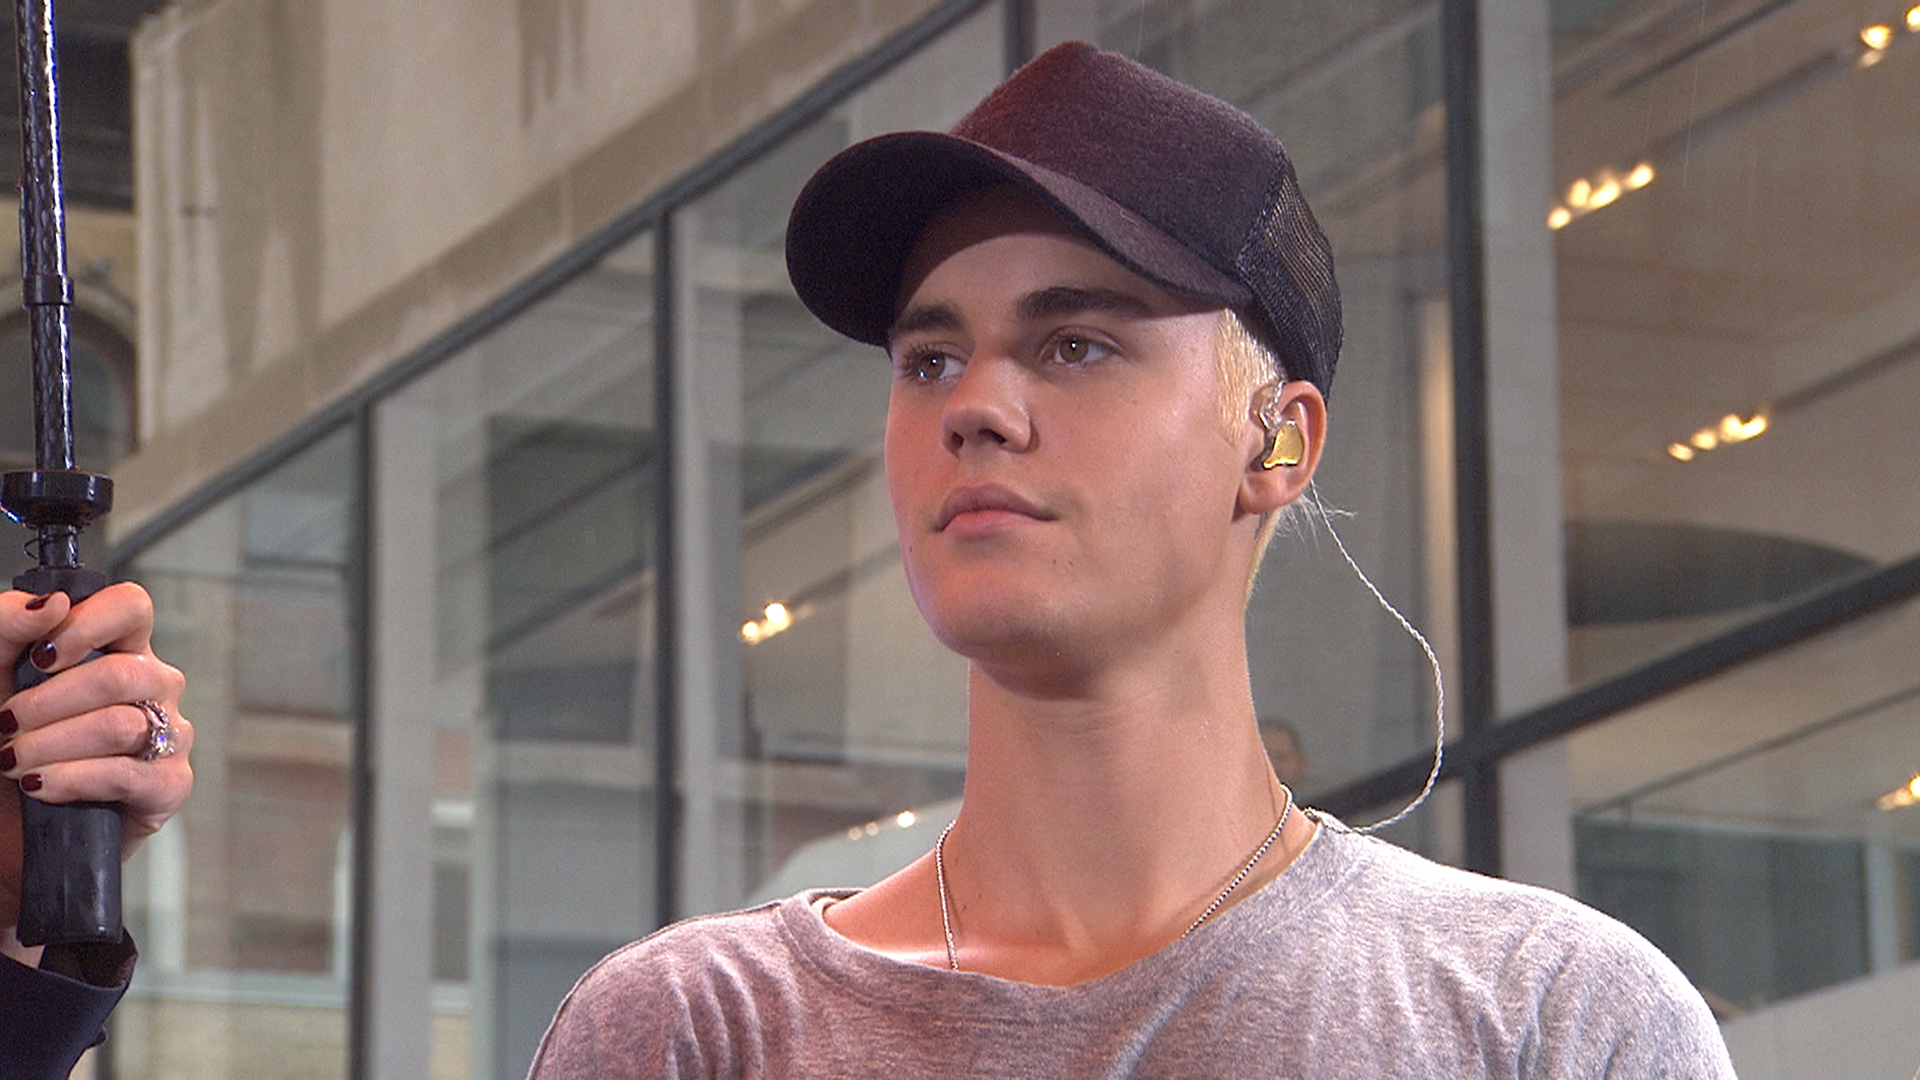 Watch Justin Bieber reveal his new blond locks on TODAY1920 x 1080